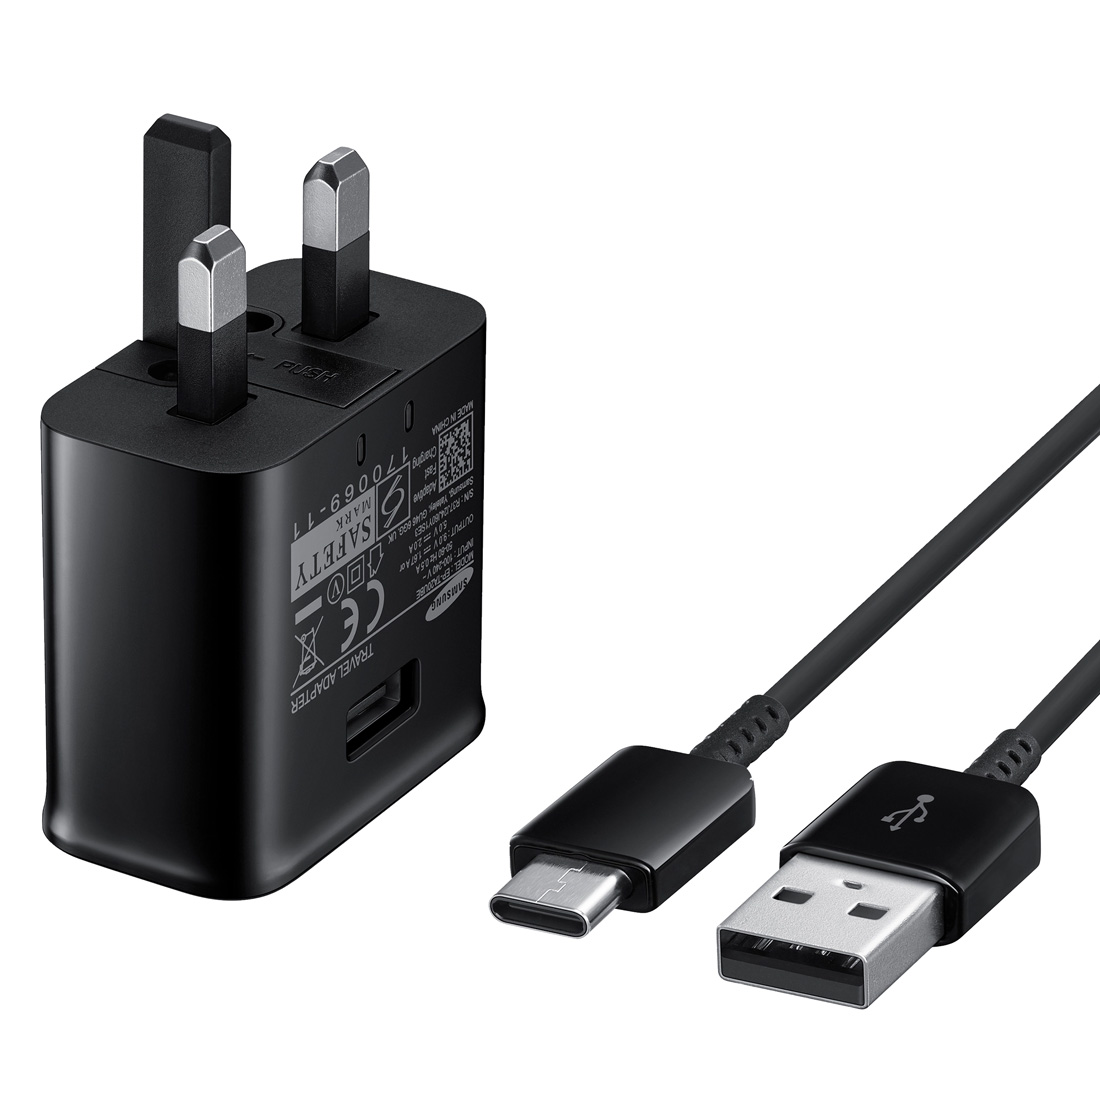 Samsung USB Adaptor-with type c cable